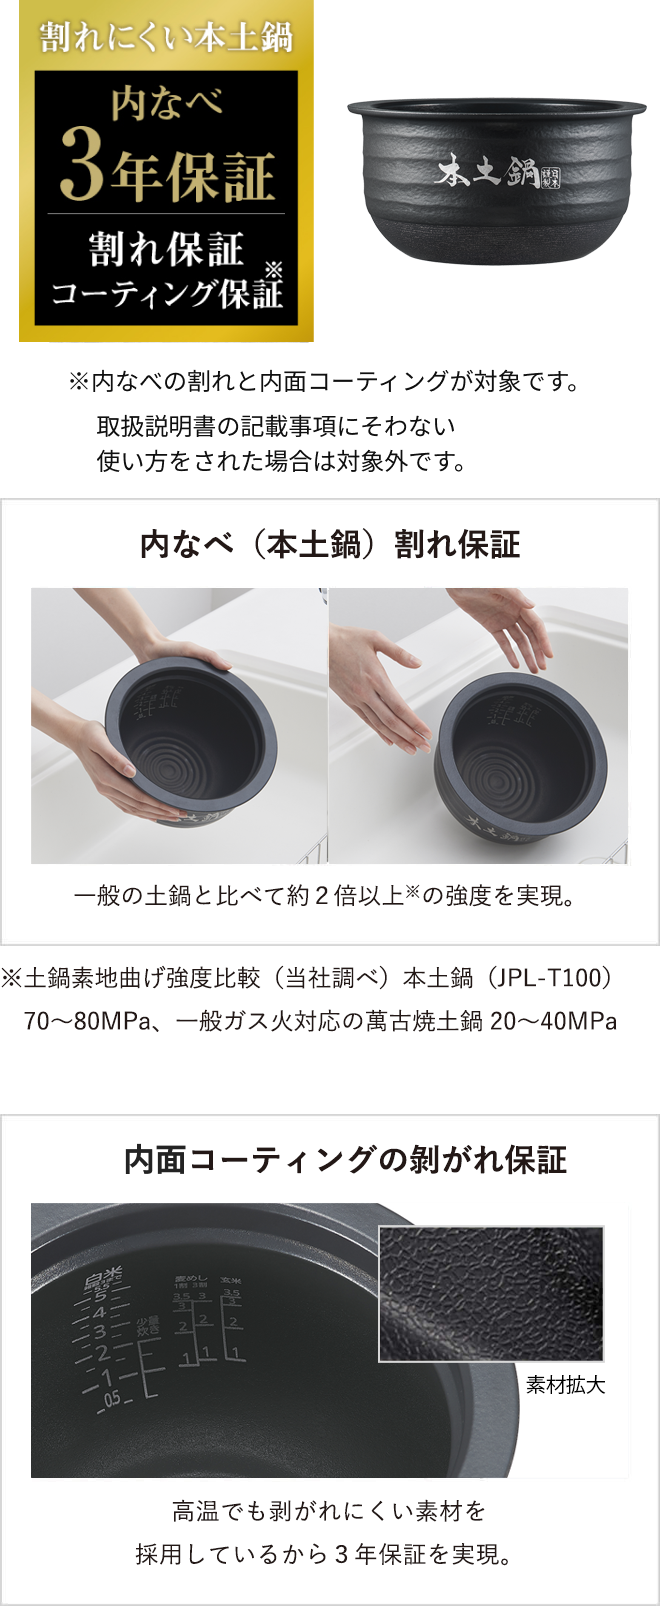 Warranty for cracking of the inner pot (authentic donabe) The authentic donabe is over twice as strong as* general ceramic inner pots. *Based on a comparison of the bending strength of the base material of the ceramic inner pot (research conducted by Tiger). Authentic ceramic inner pot (JPL-T100): 70 to 80 MPa; conventional Banko clay pot for gas heating: 20 to 40 MPa